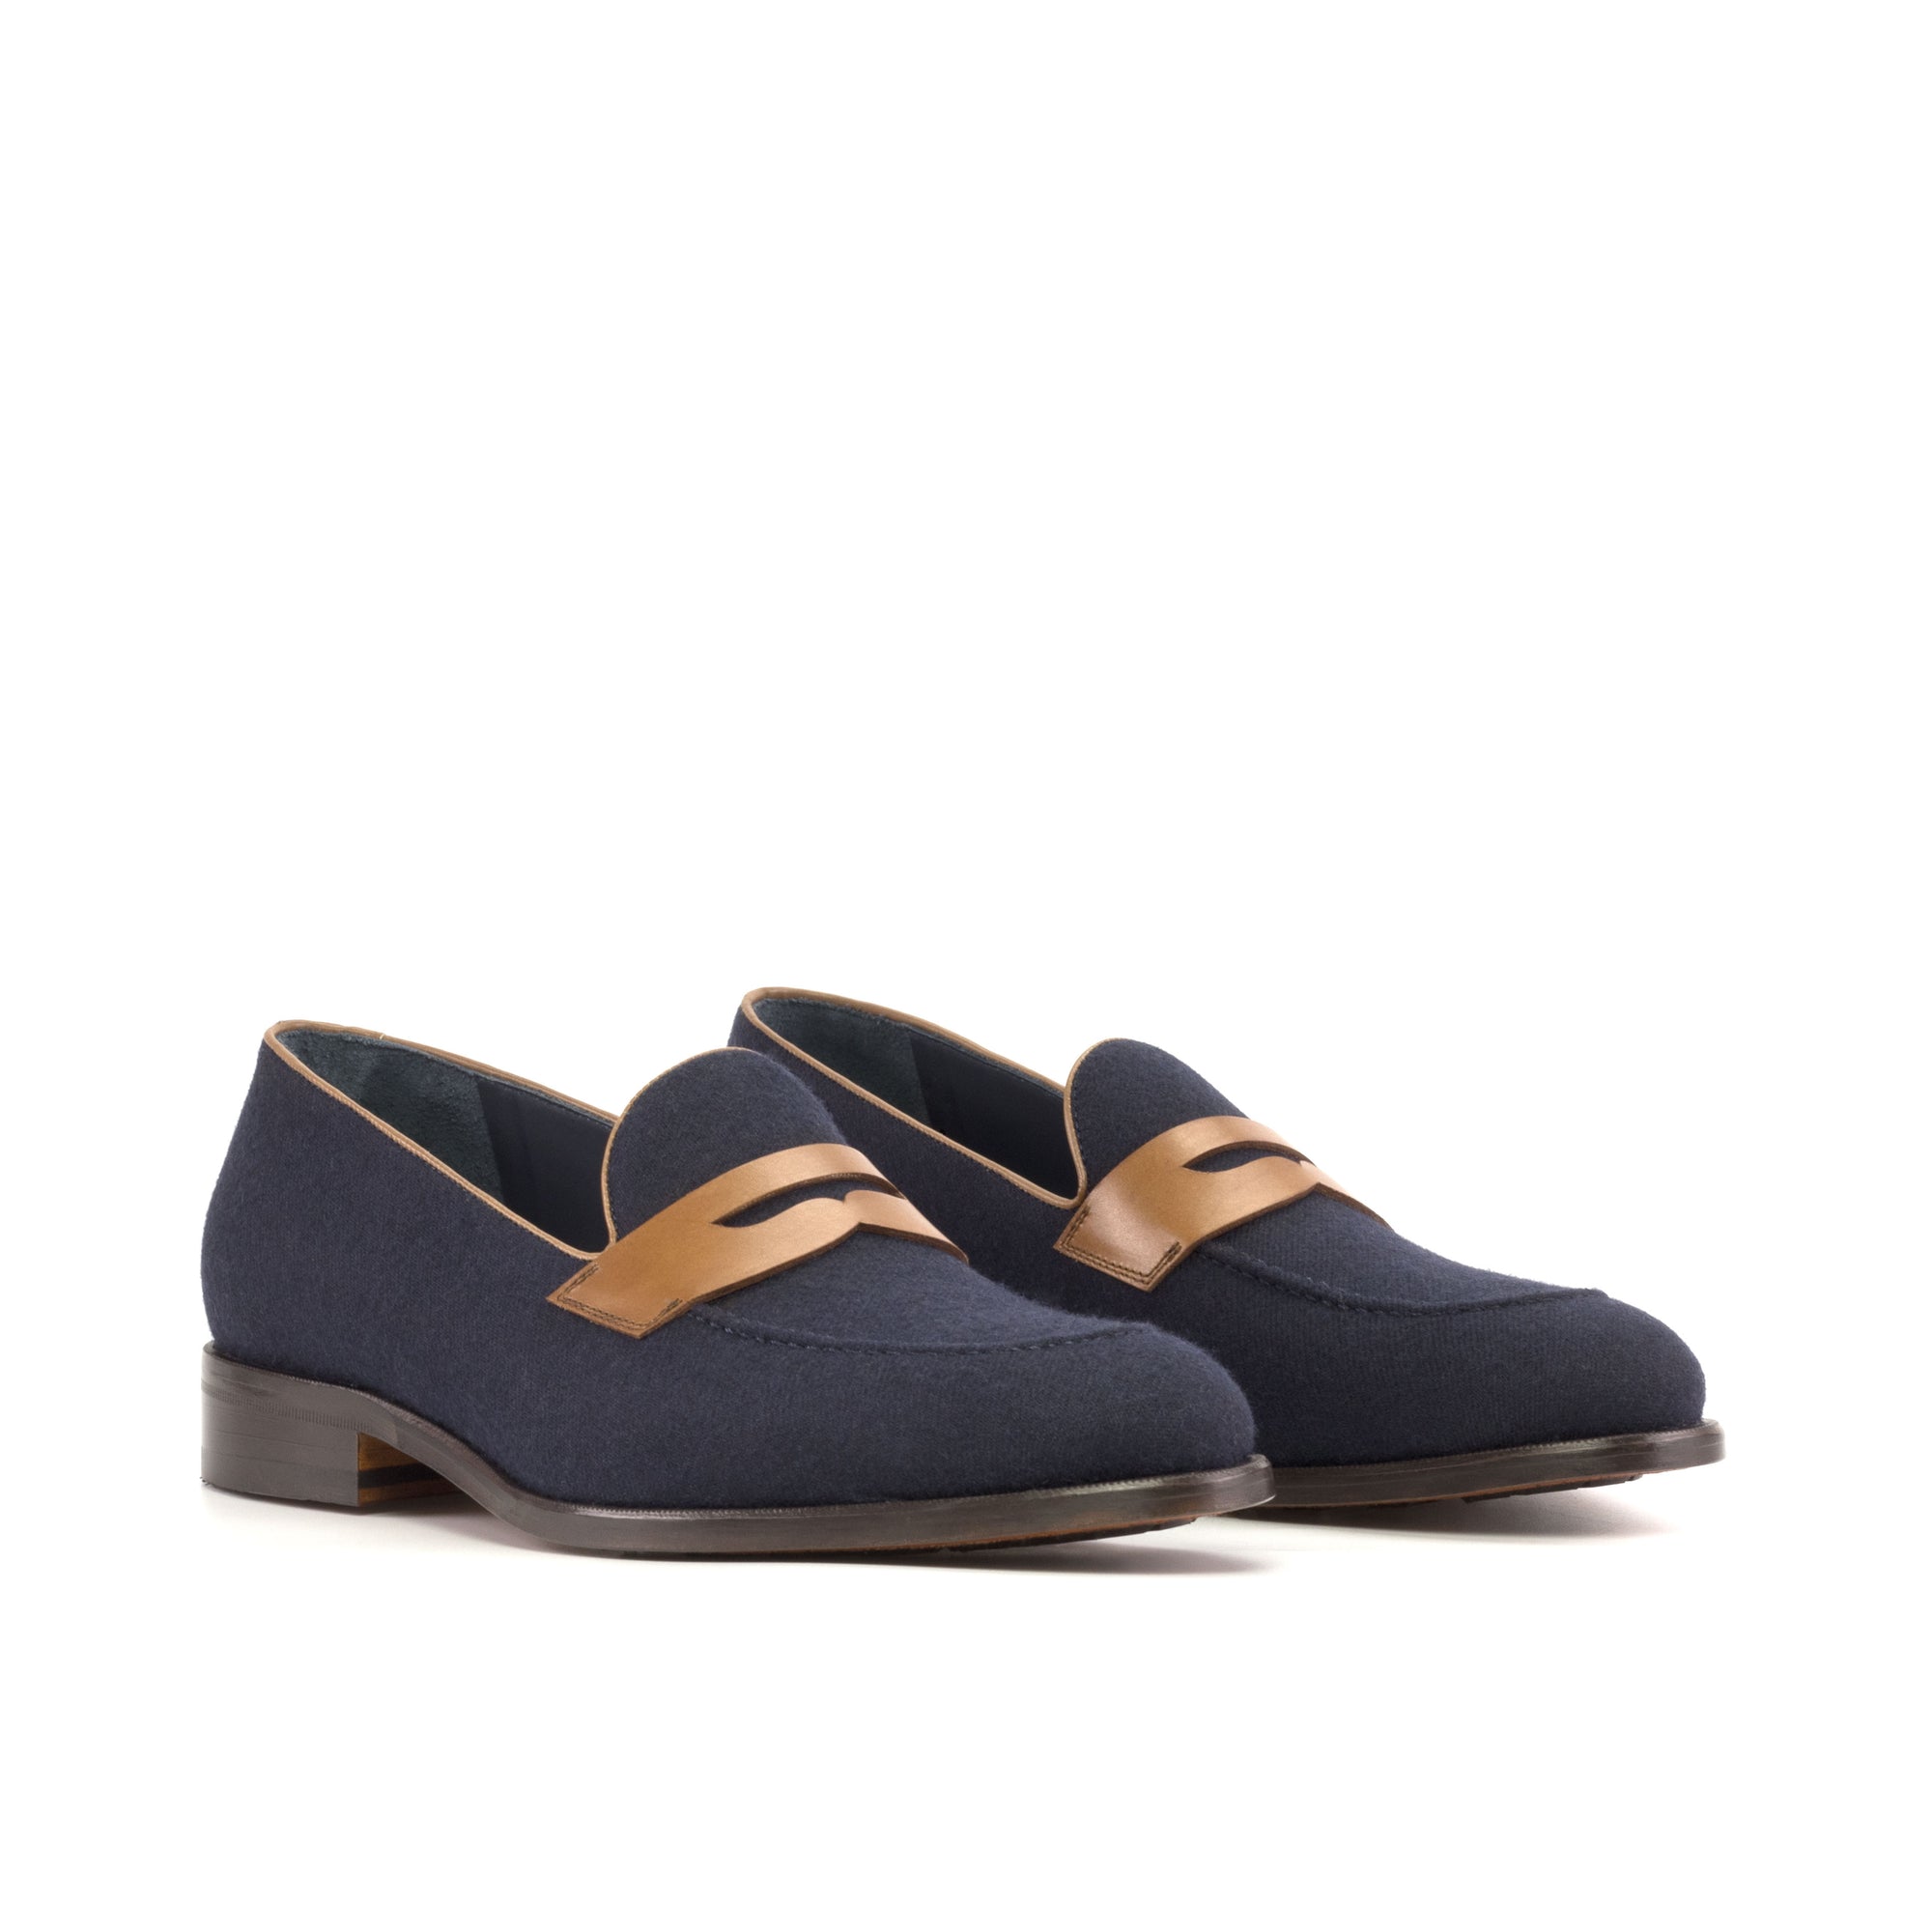 Loafers in Navy Flannel and Medium Brown Leather, Luxury Loafers